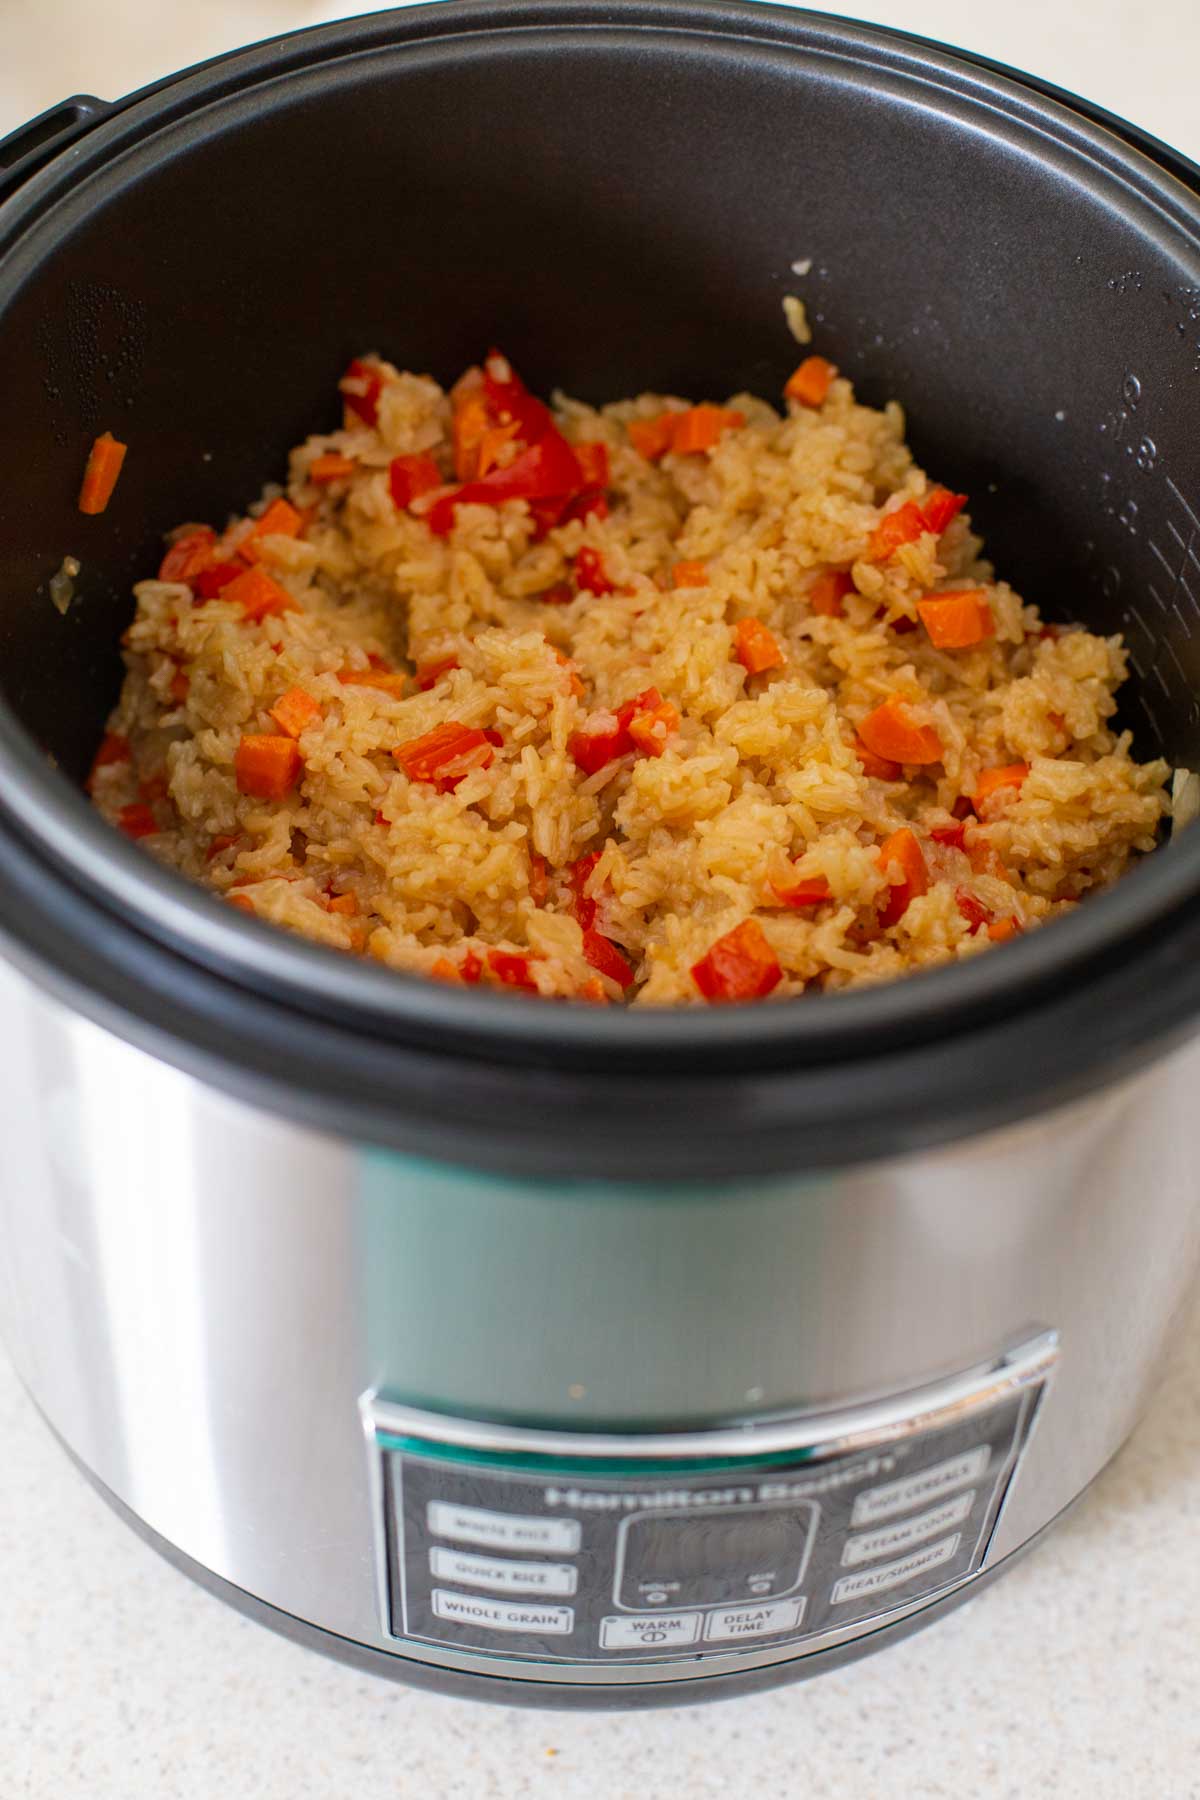 The finished rice with veggies is shown in the Instant Pot pot.